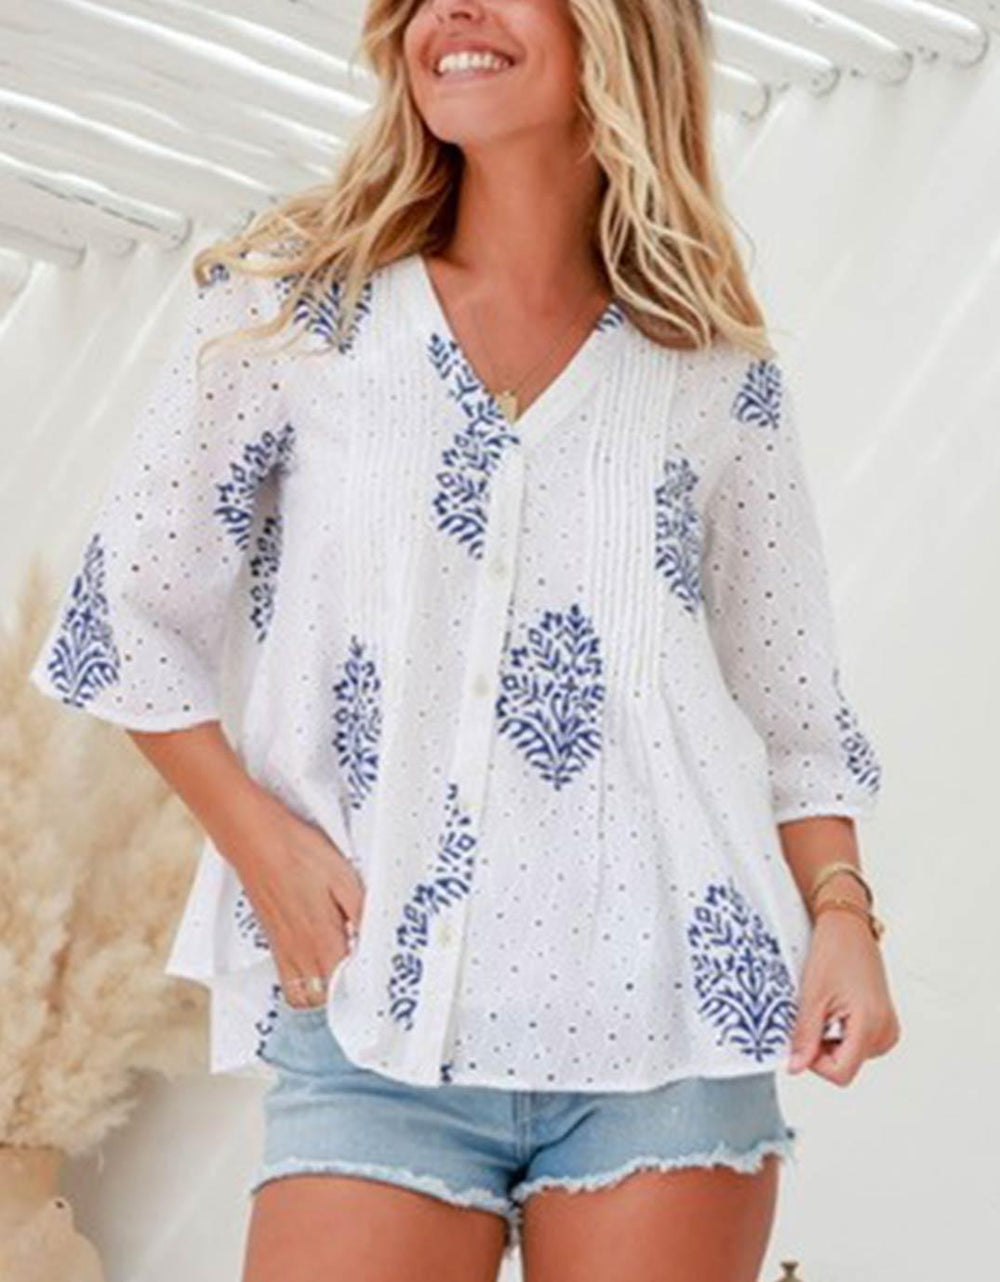 Cotton Broderie Print Top - White/Cobalt - White & Co Living